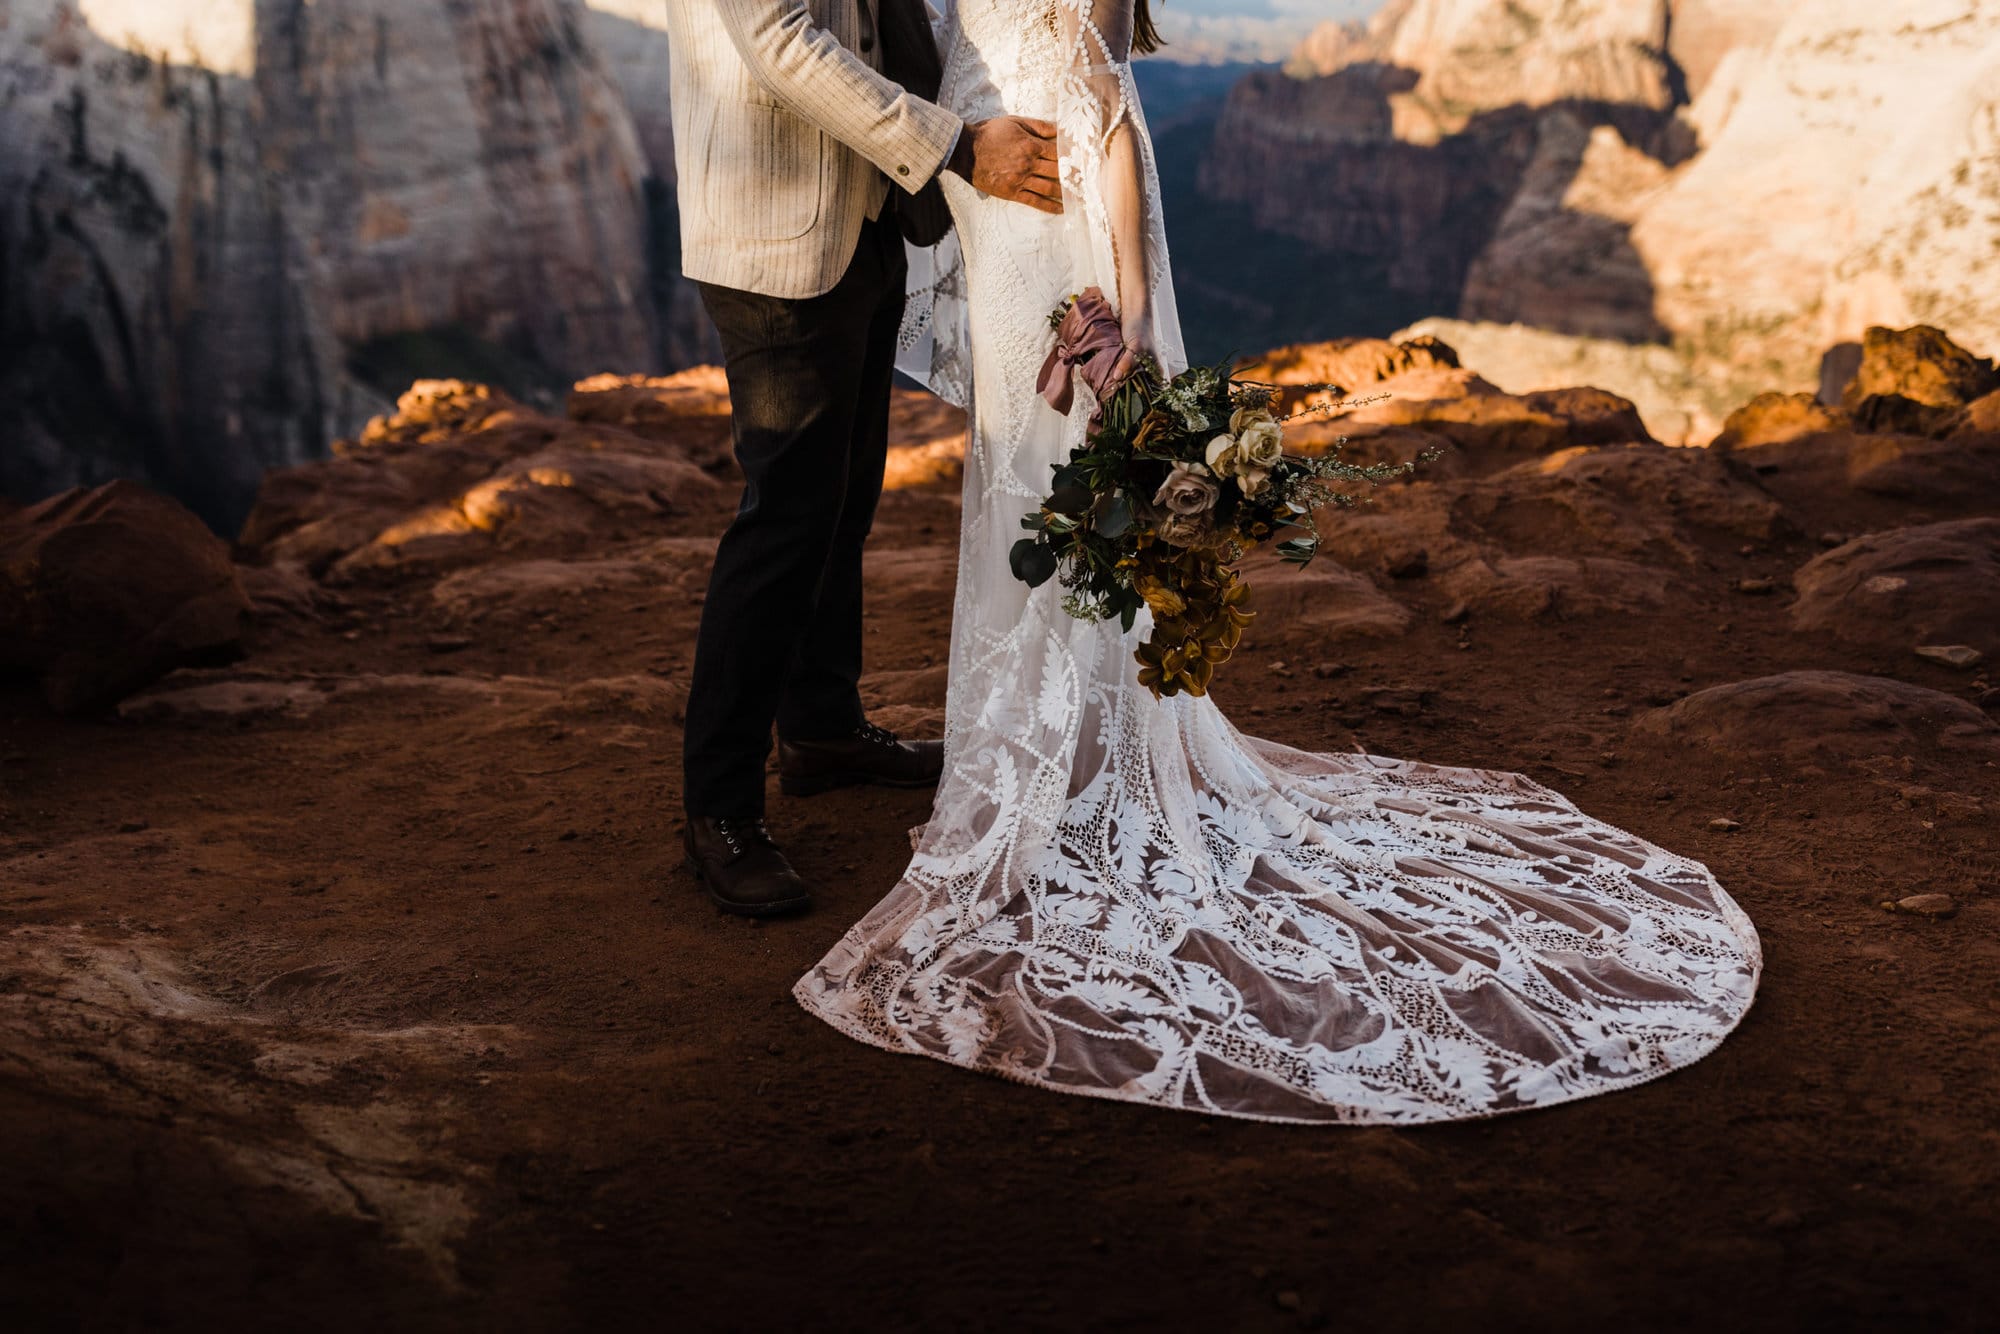 K + B wanted a true adventure wedding- compete with photos under the Milky Way, two intense hikes, and a bouquet dreams are made of. This one isn't to be missed.